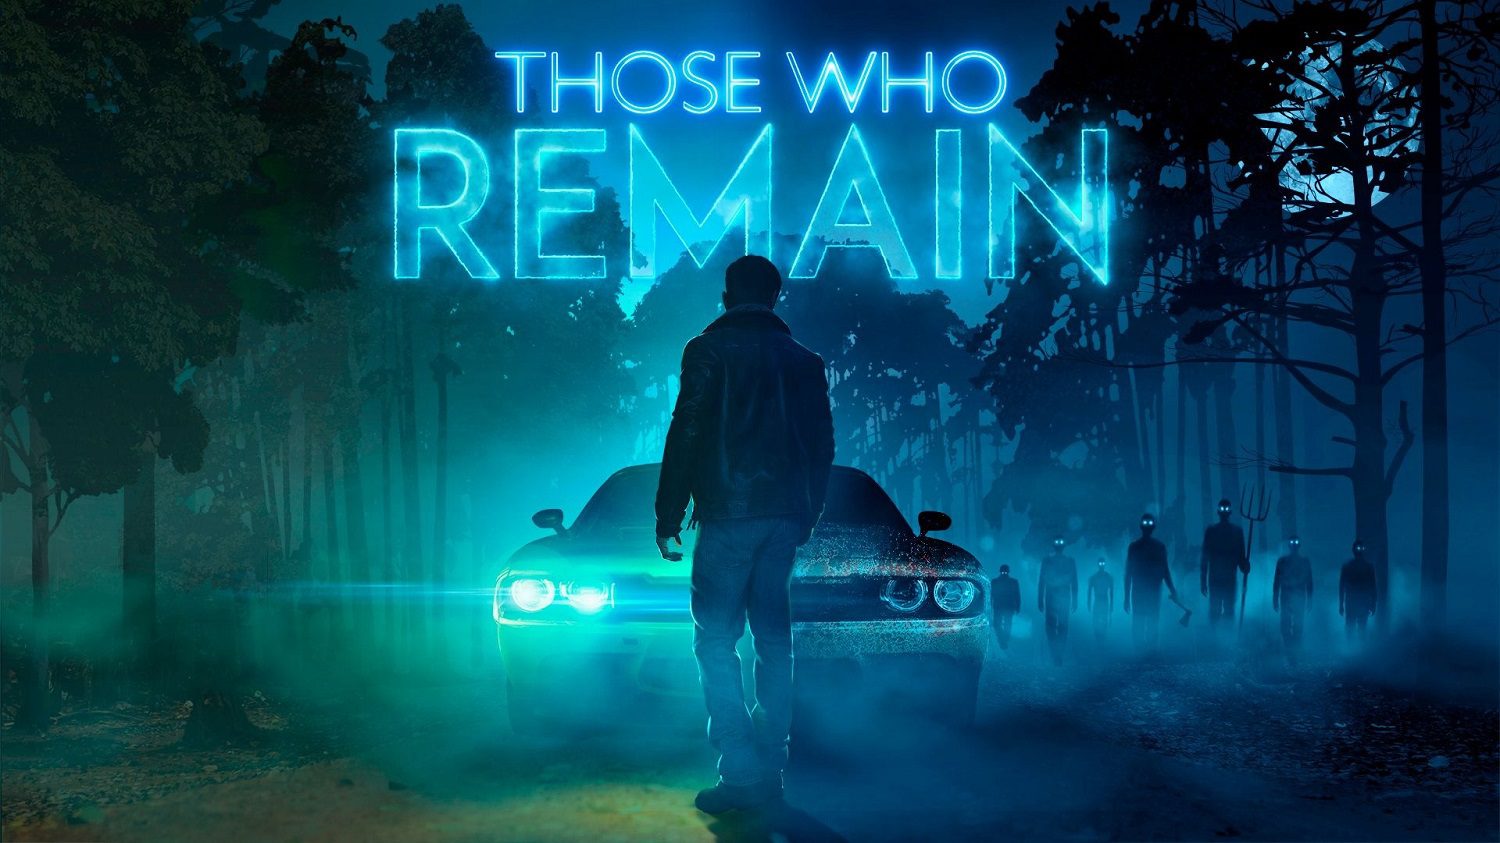 Review: Those Who Remain sacrifices a strong narrative for repetitive stealth sequences